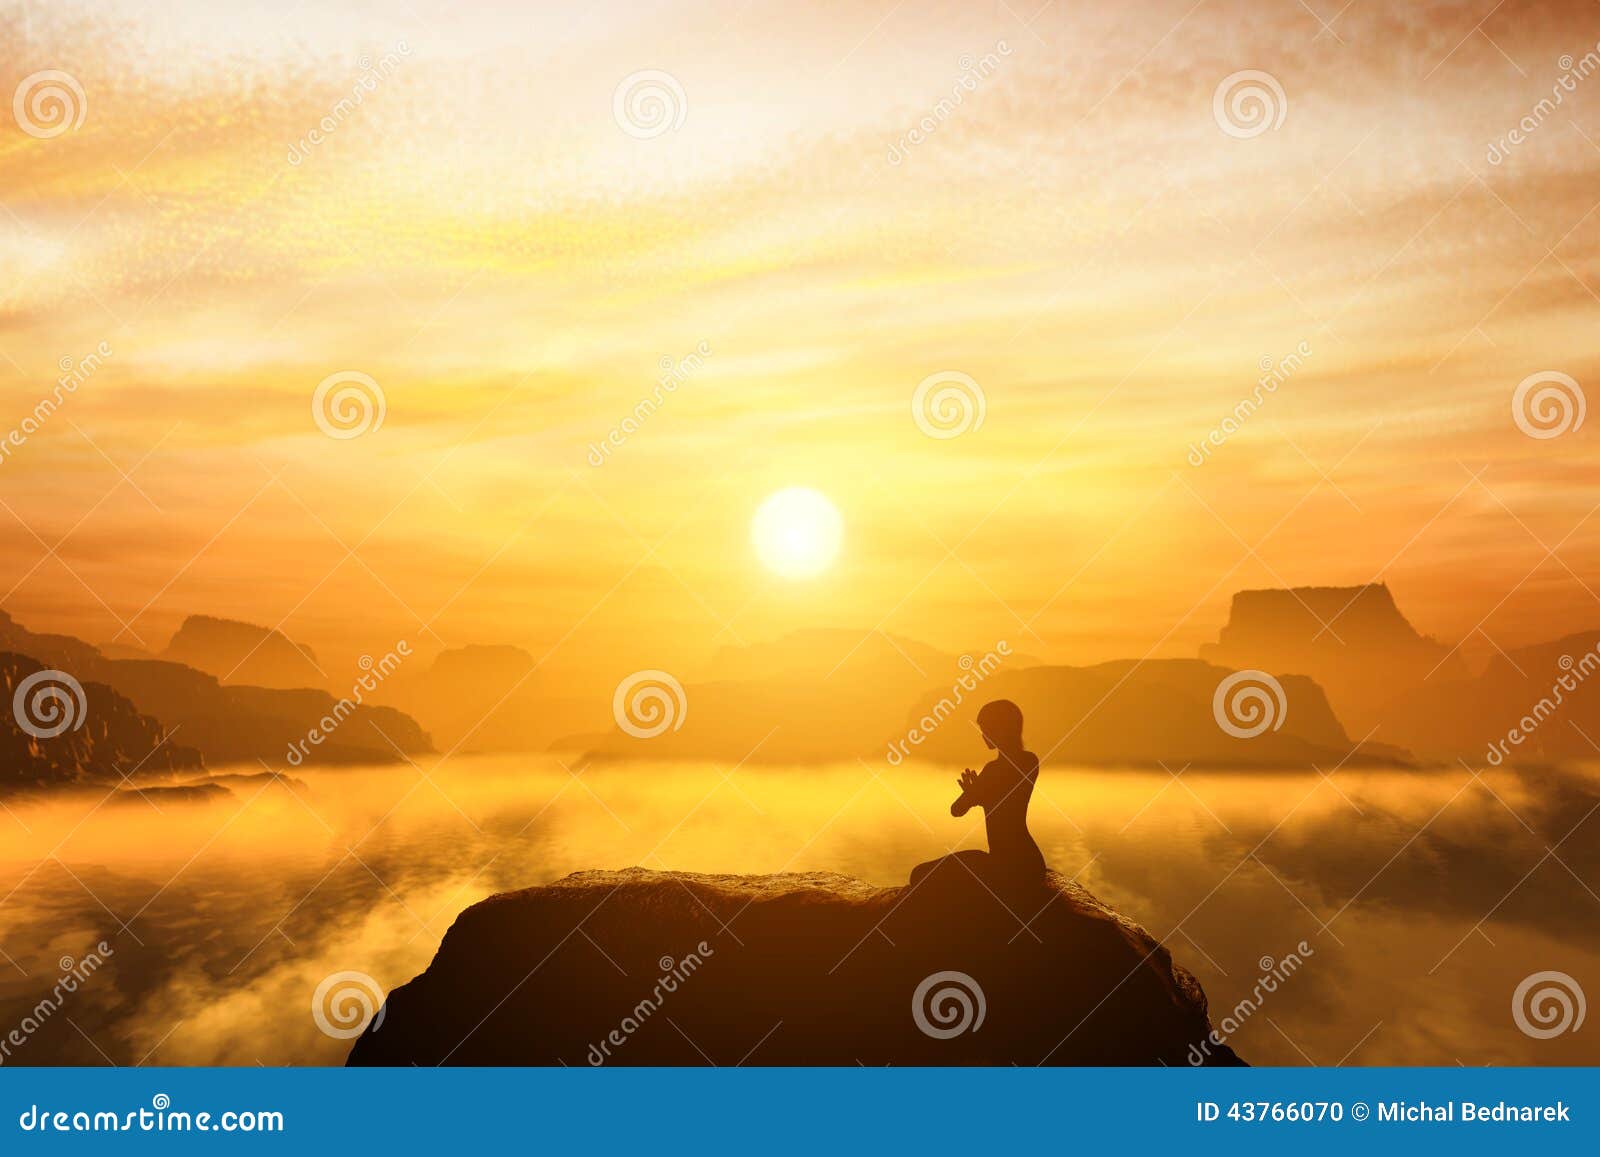 woman meditating in sitting yoga position on the top of a mountains